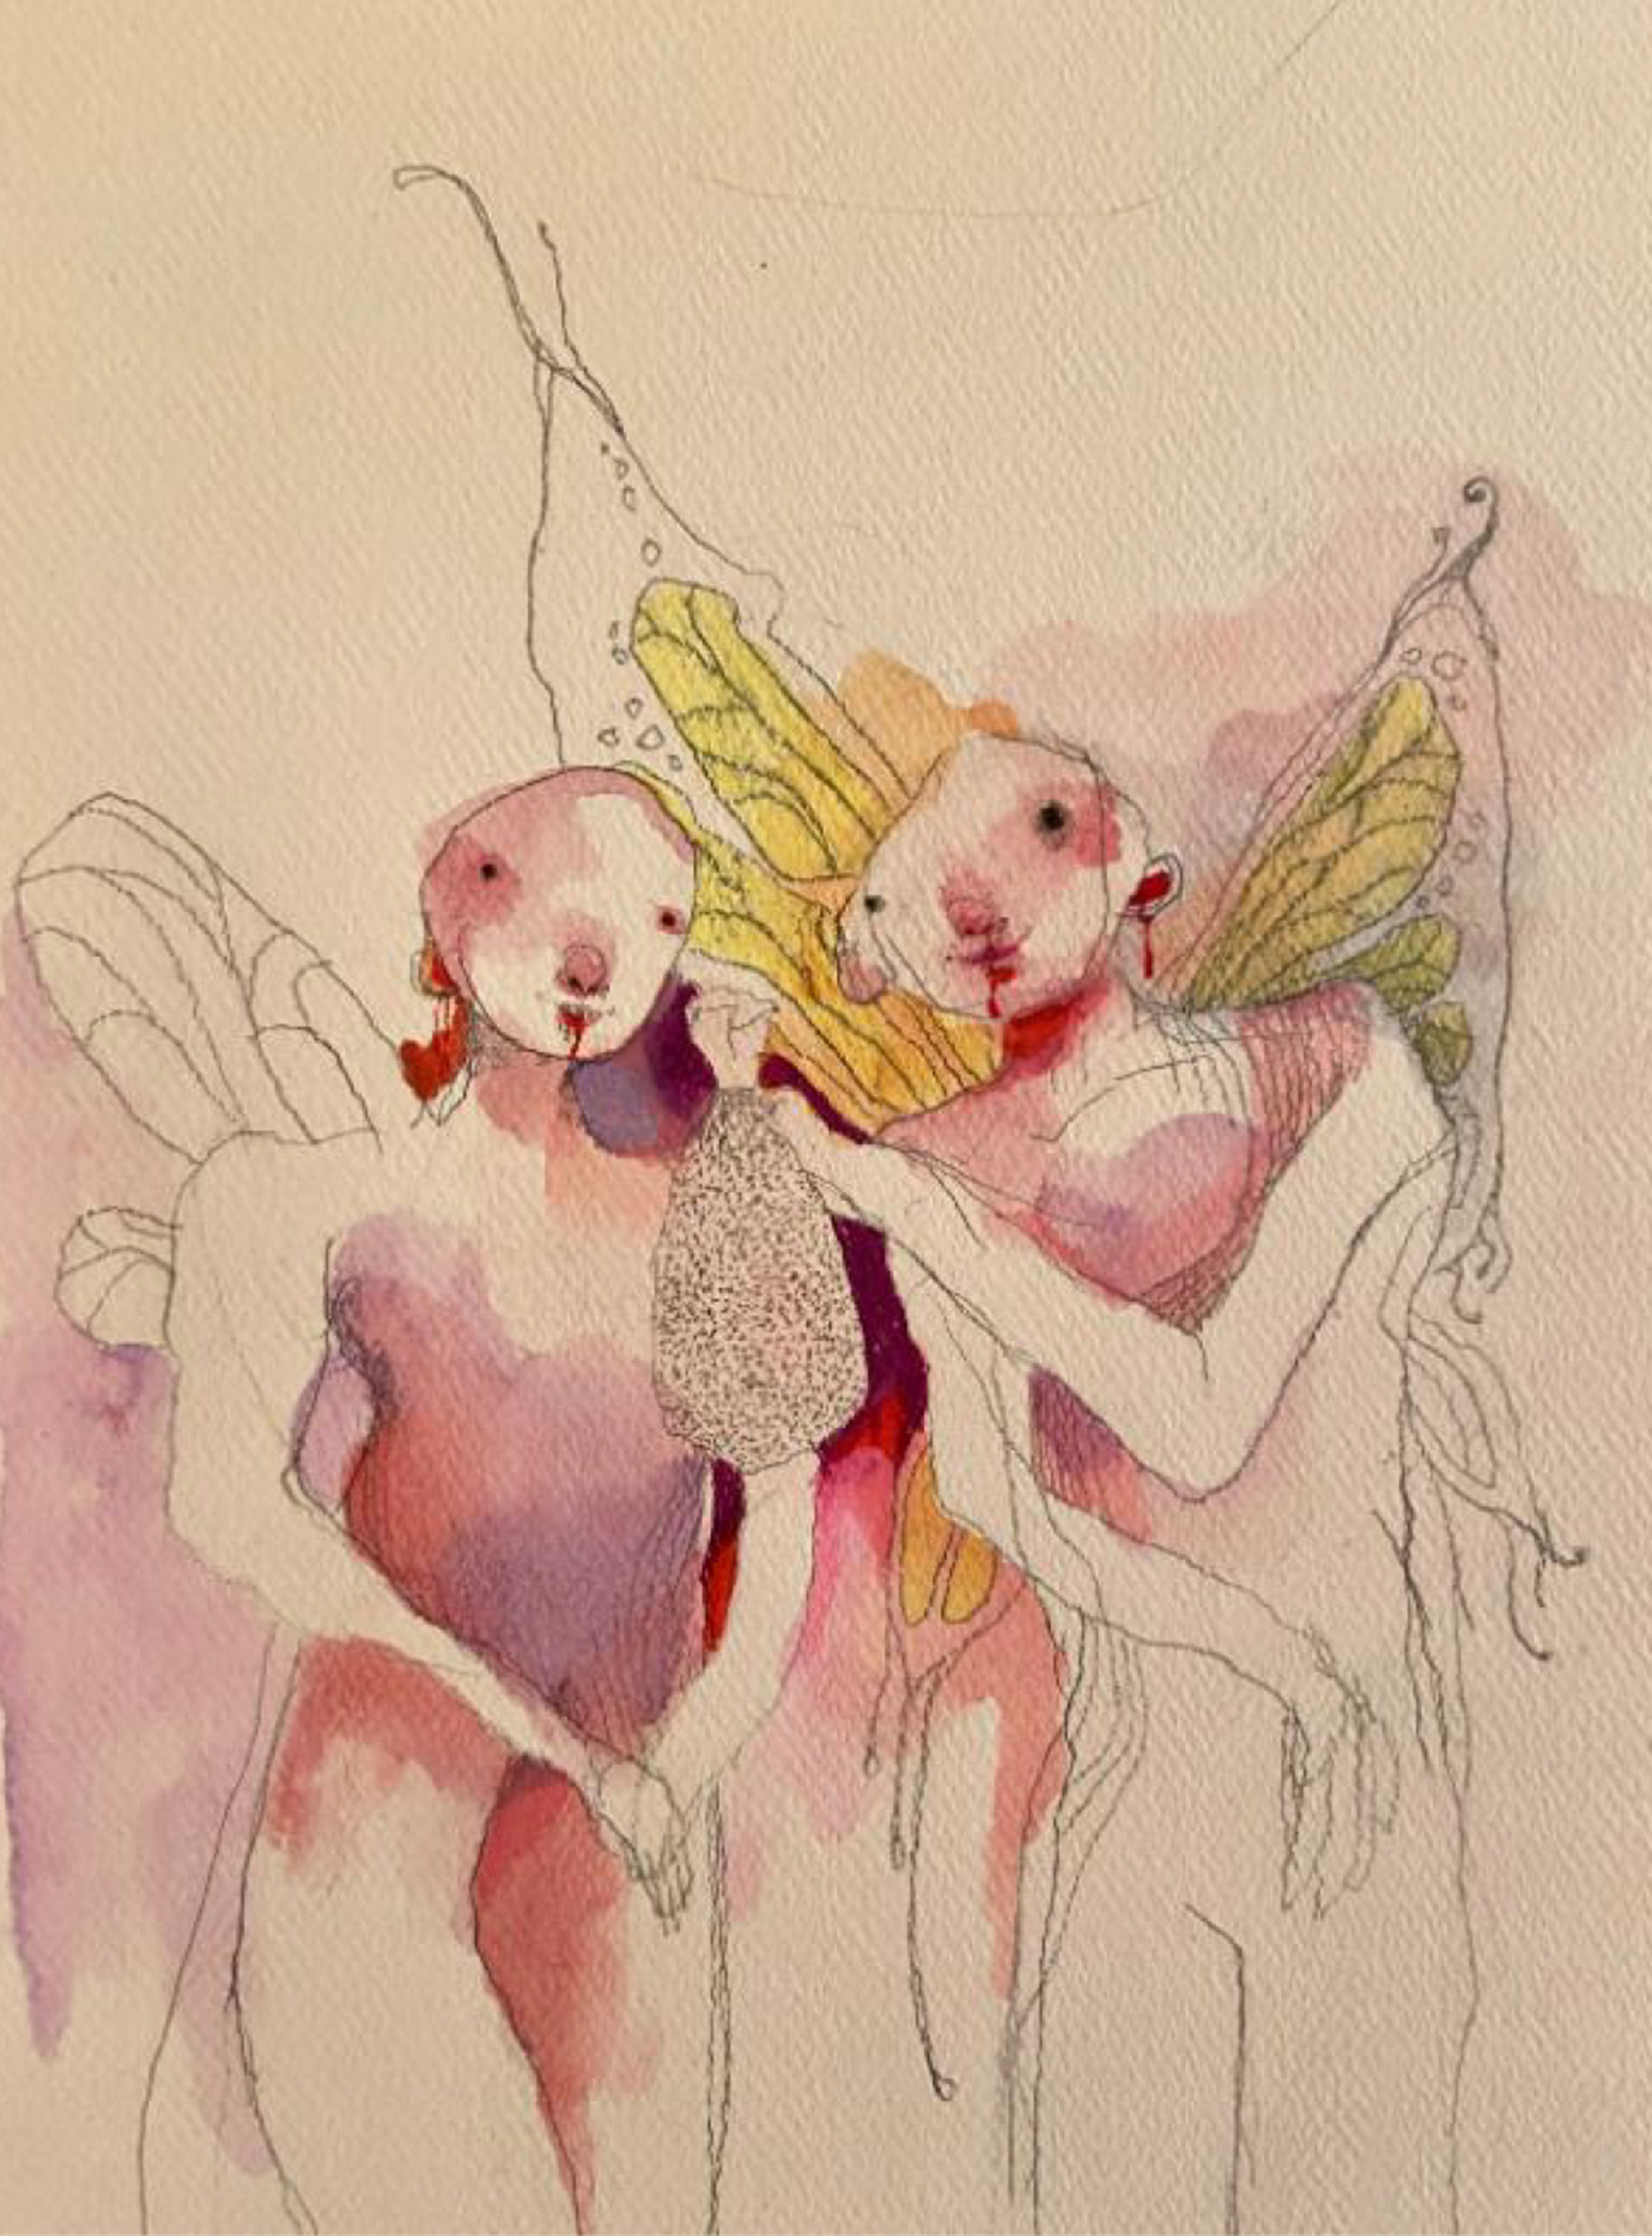 Illustration of two abstract figures with wings